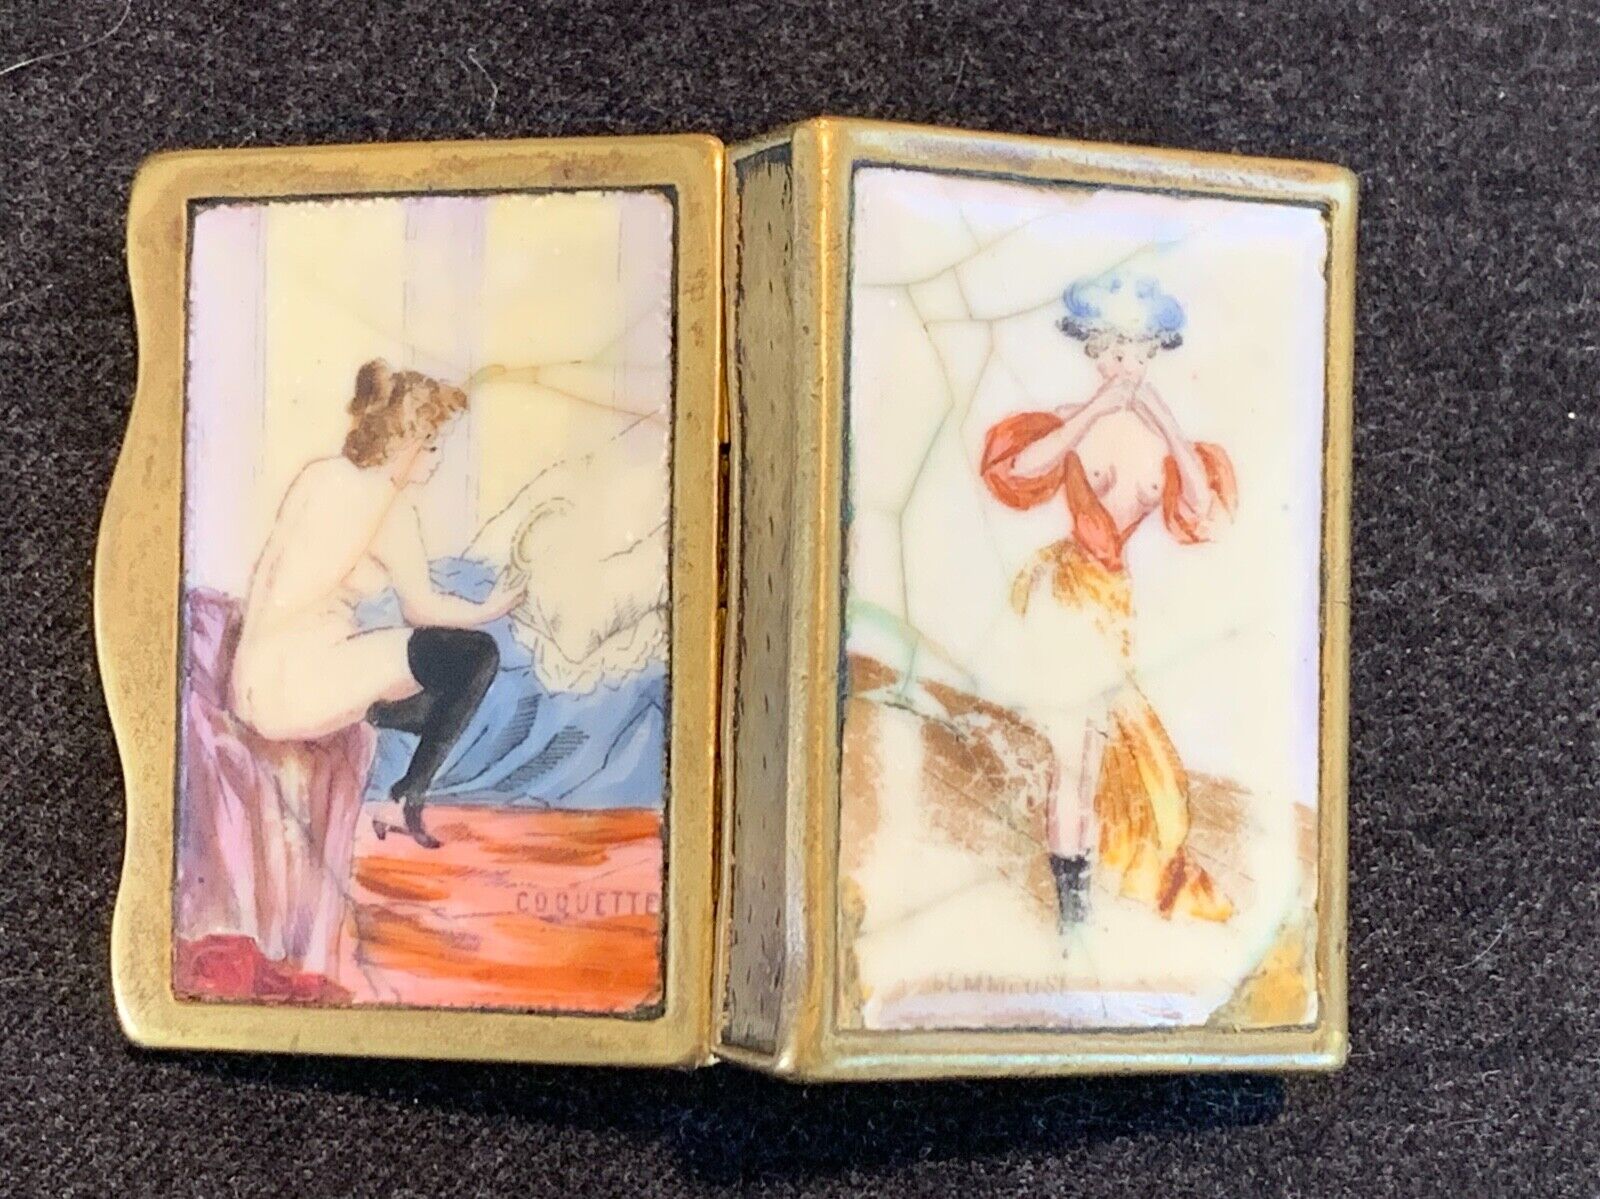 ANTIQUE PAINTED VESTA MATCH SAFE WITH SEMI NUDE PORCELAIN INSERTS FRONT AND BACK